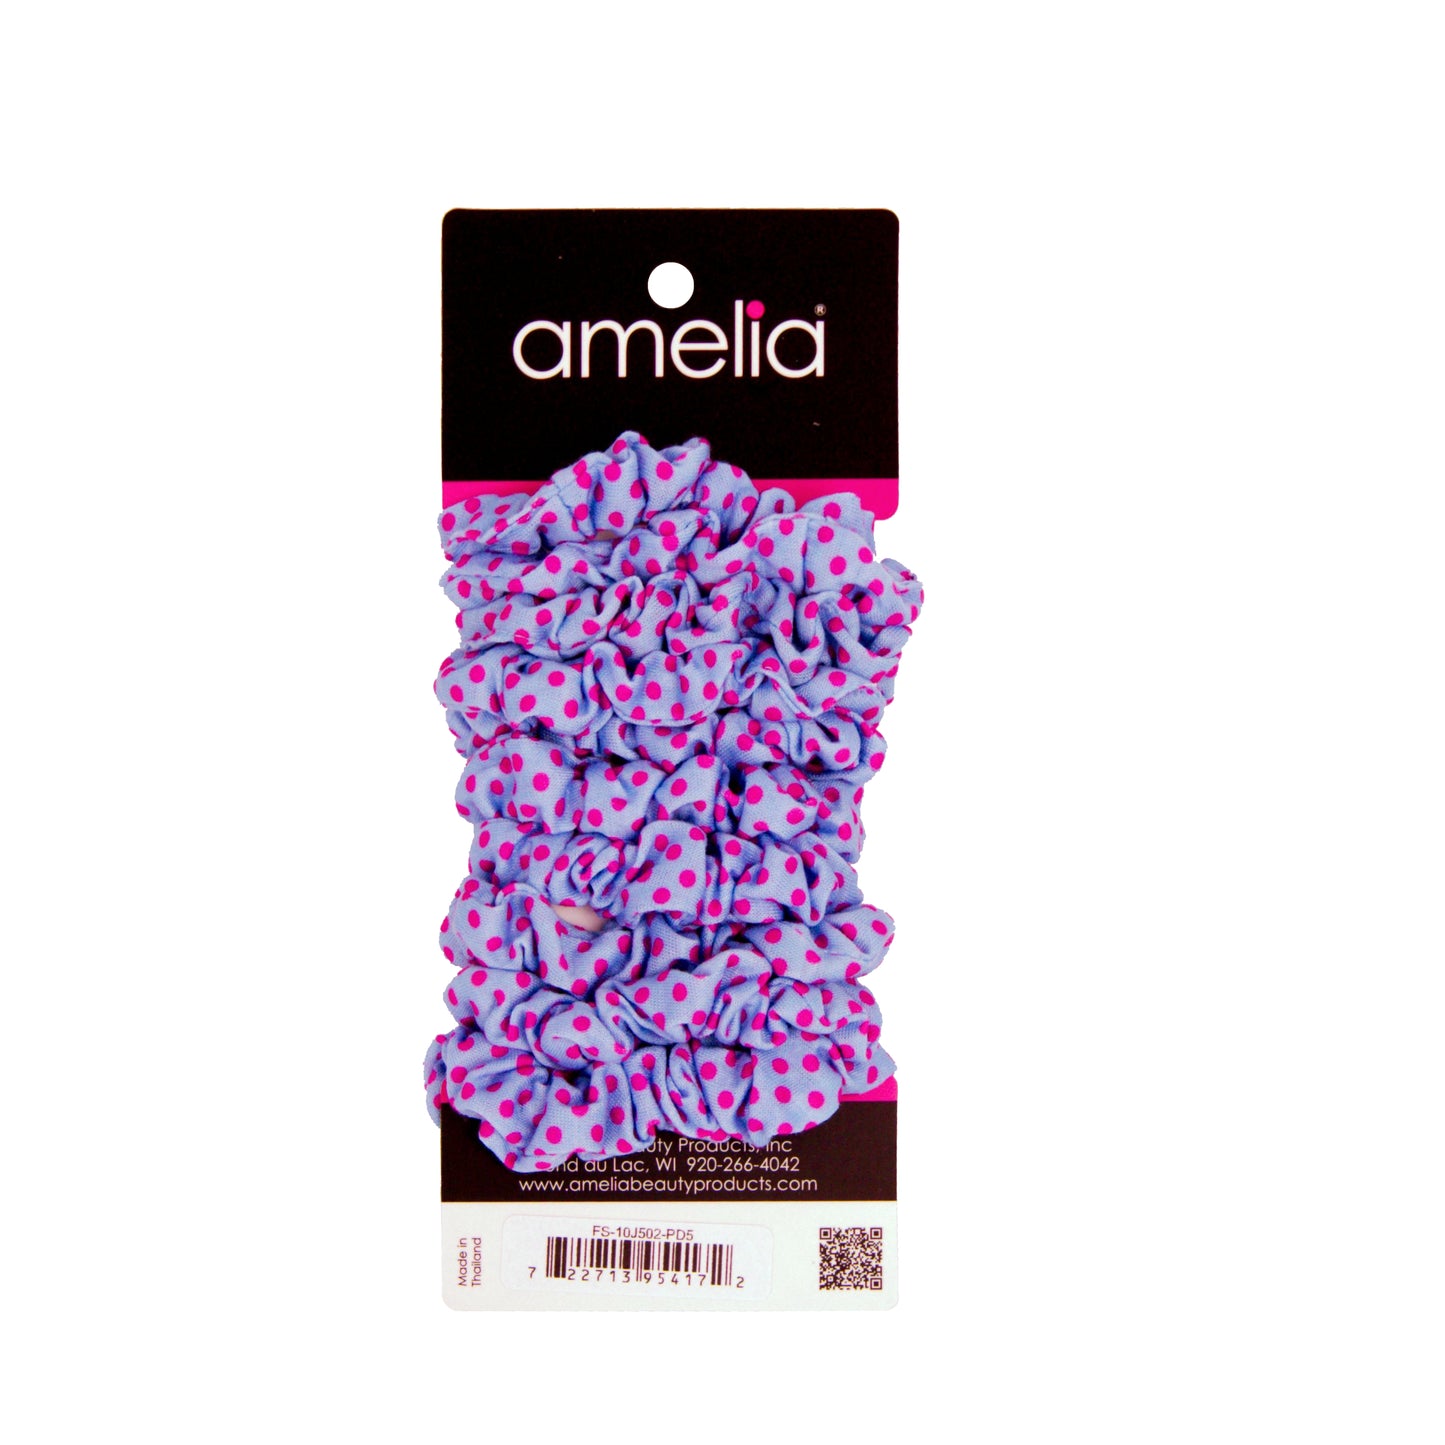 Amelia Beauty, Medium Pink Blue Dot Jersey Scrunchies, 2.5in Diameter, Gentle on Hair, Strong Hold, No Snag, No Dents or Creases. 10 Pack